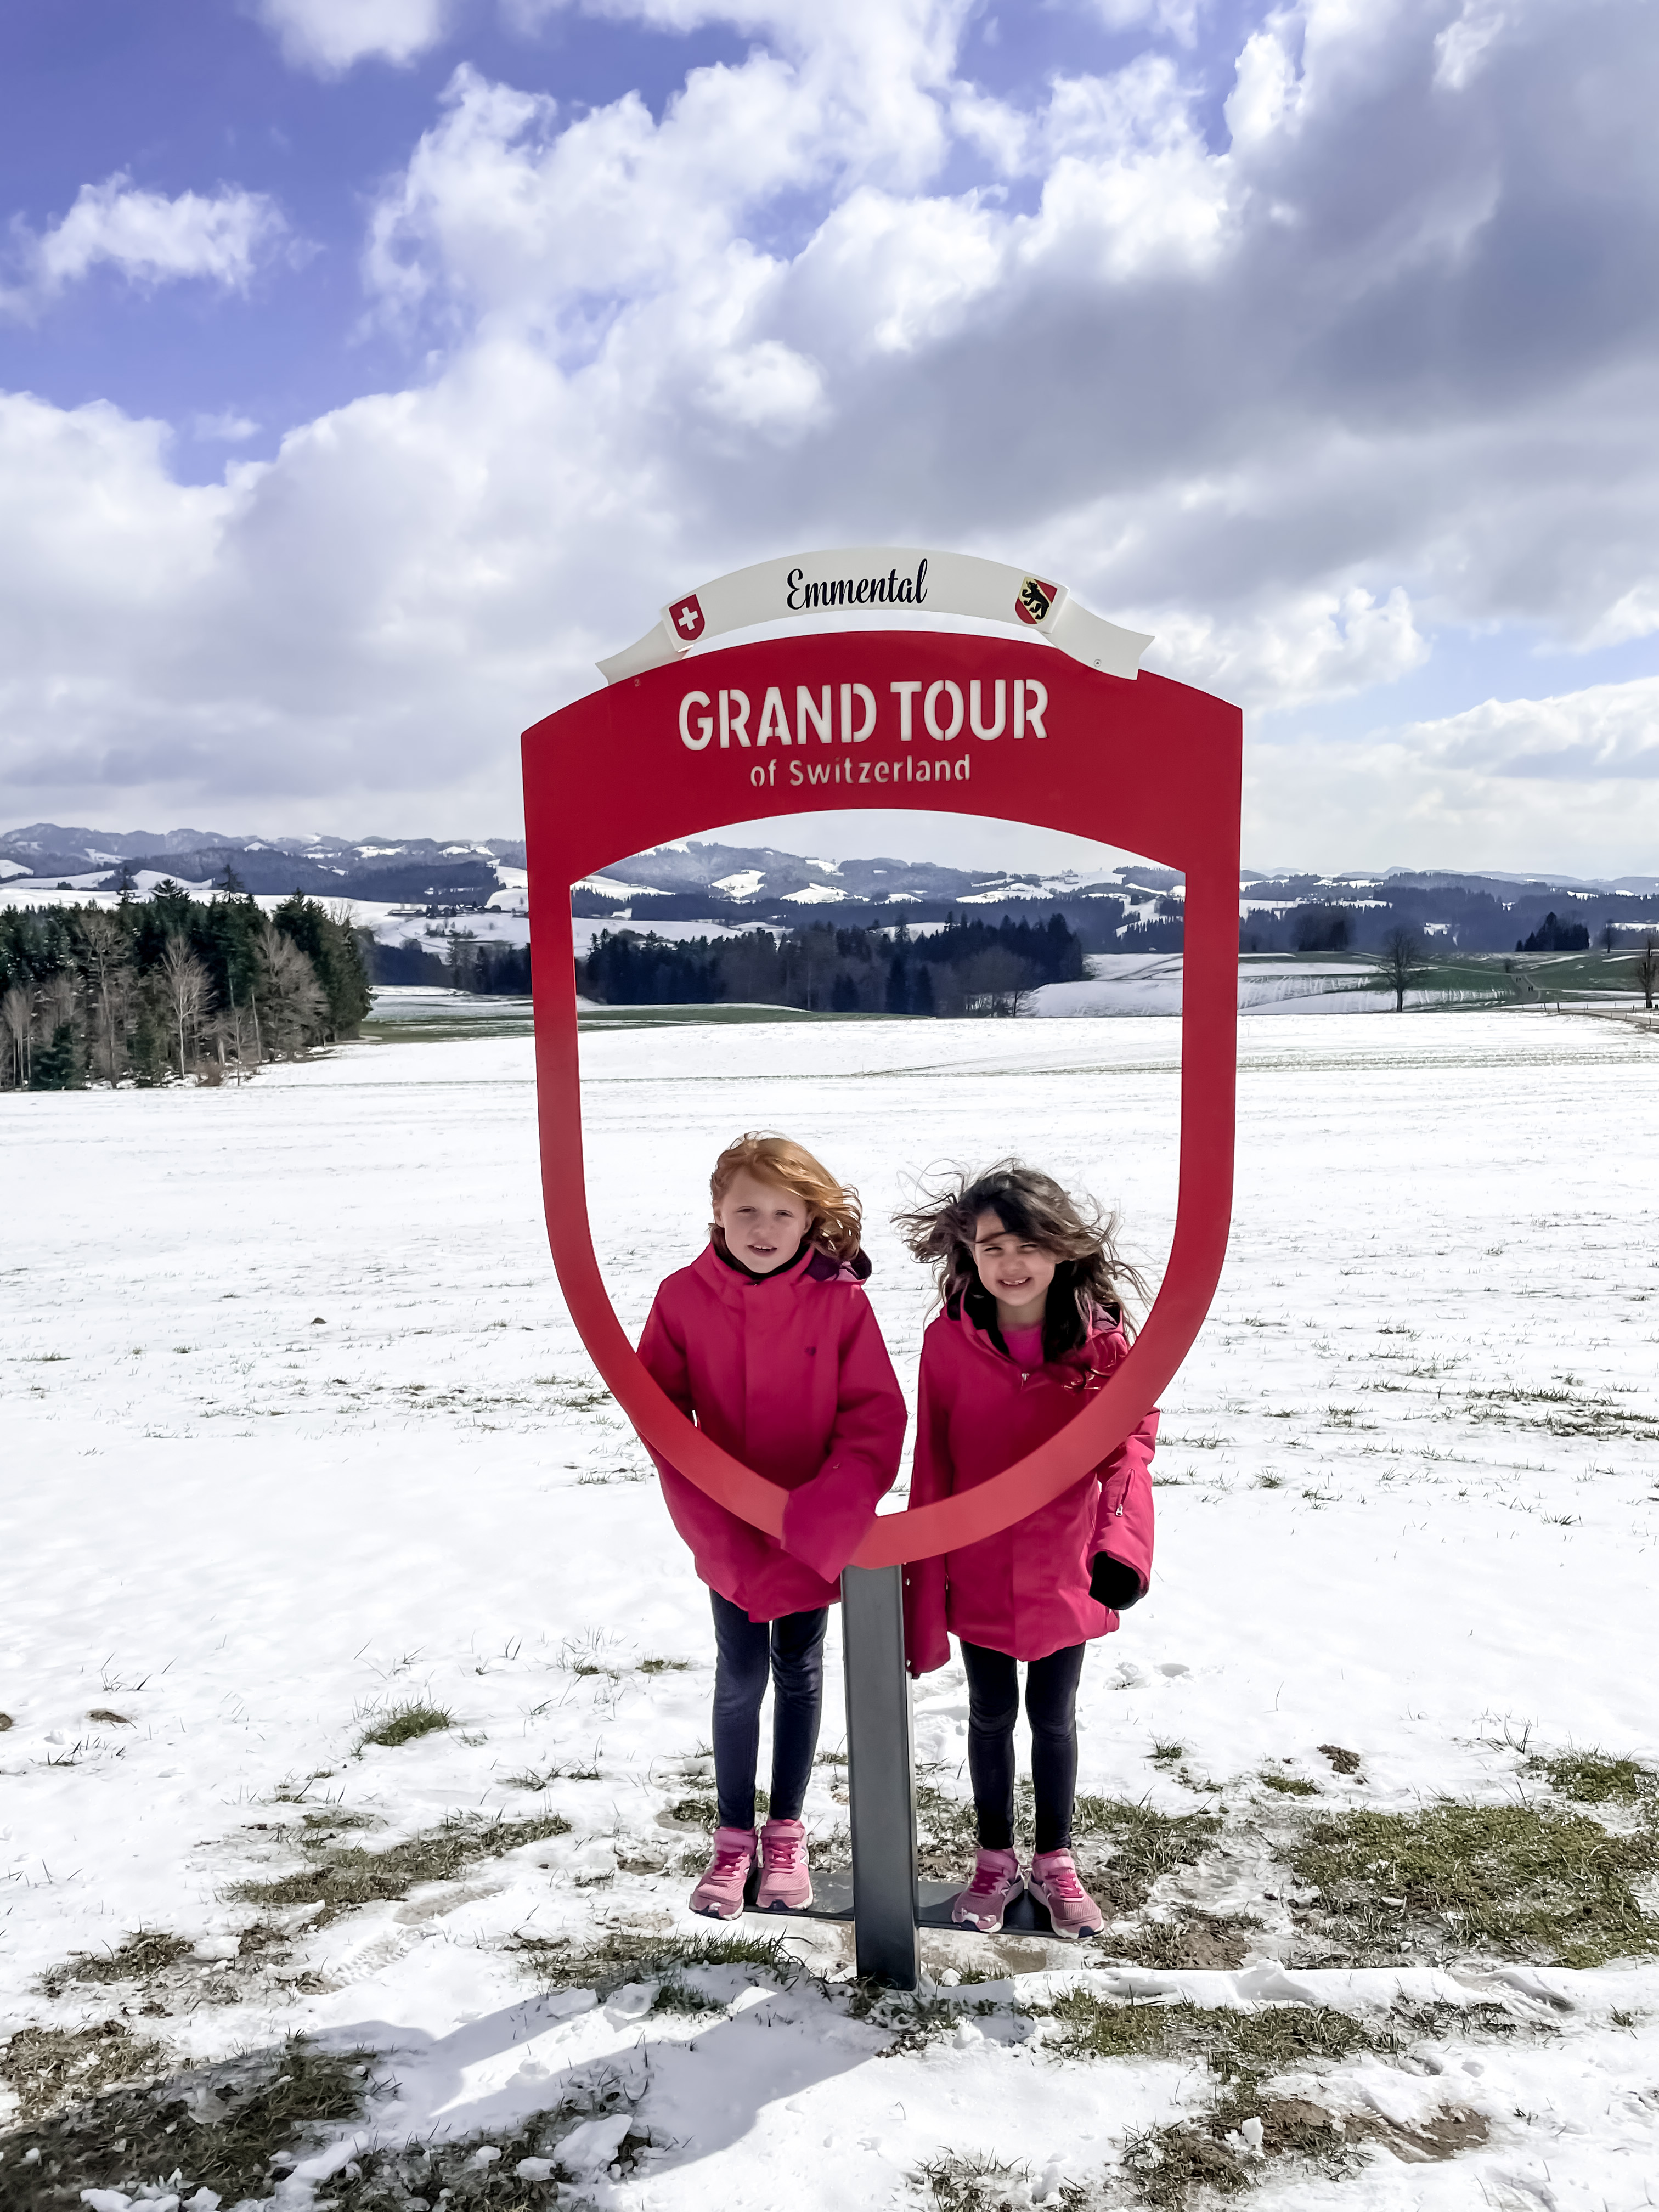 Grand Tour Photo Spot in Emmental - Say Cheese!